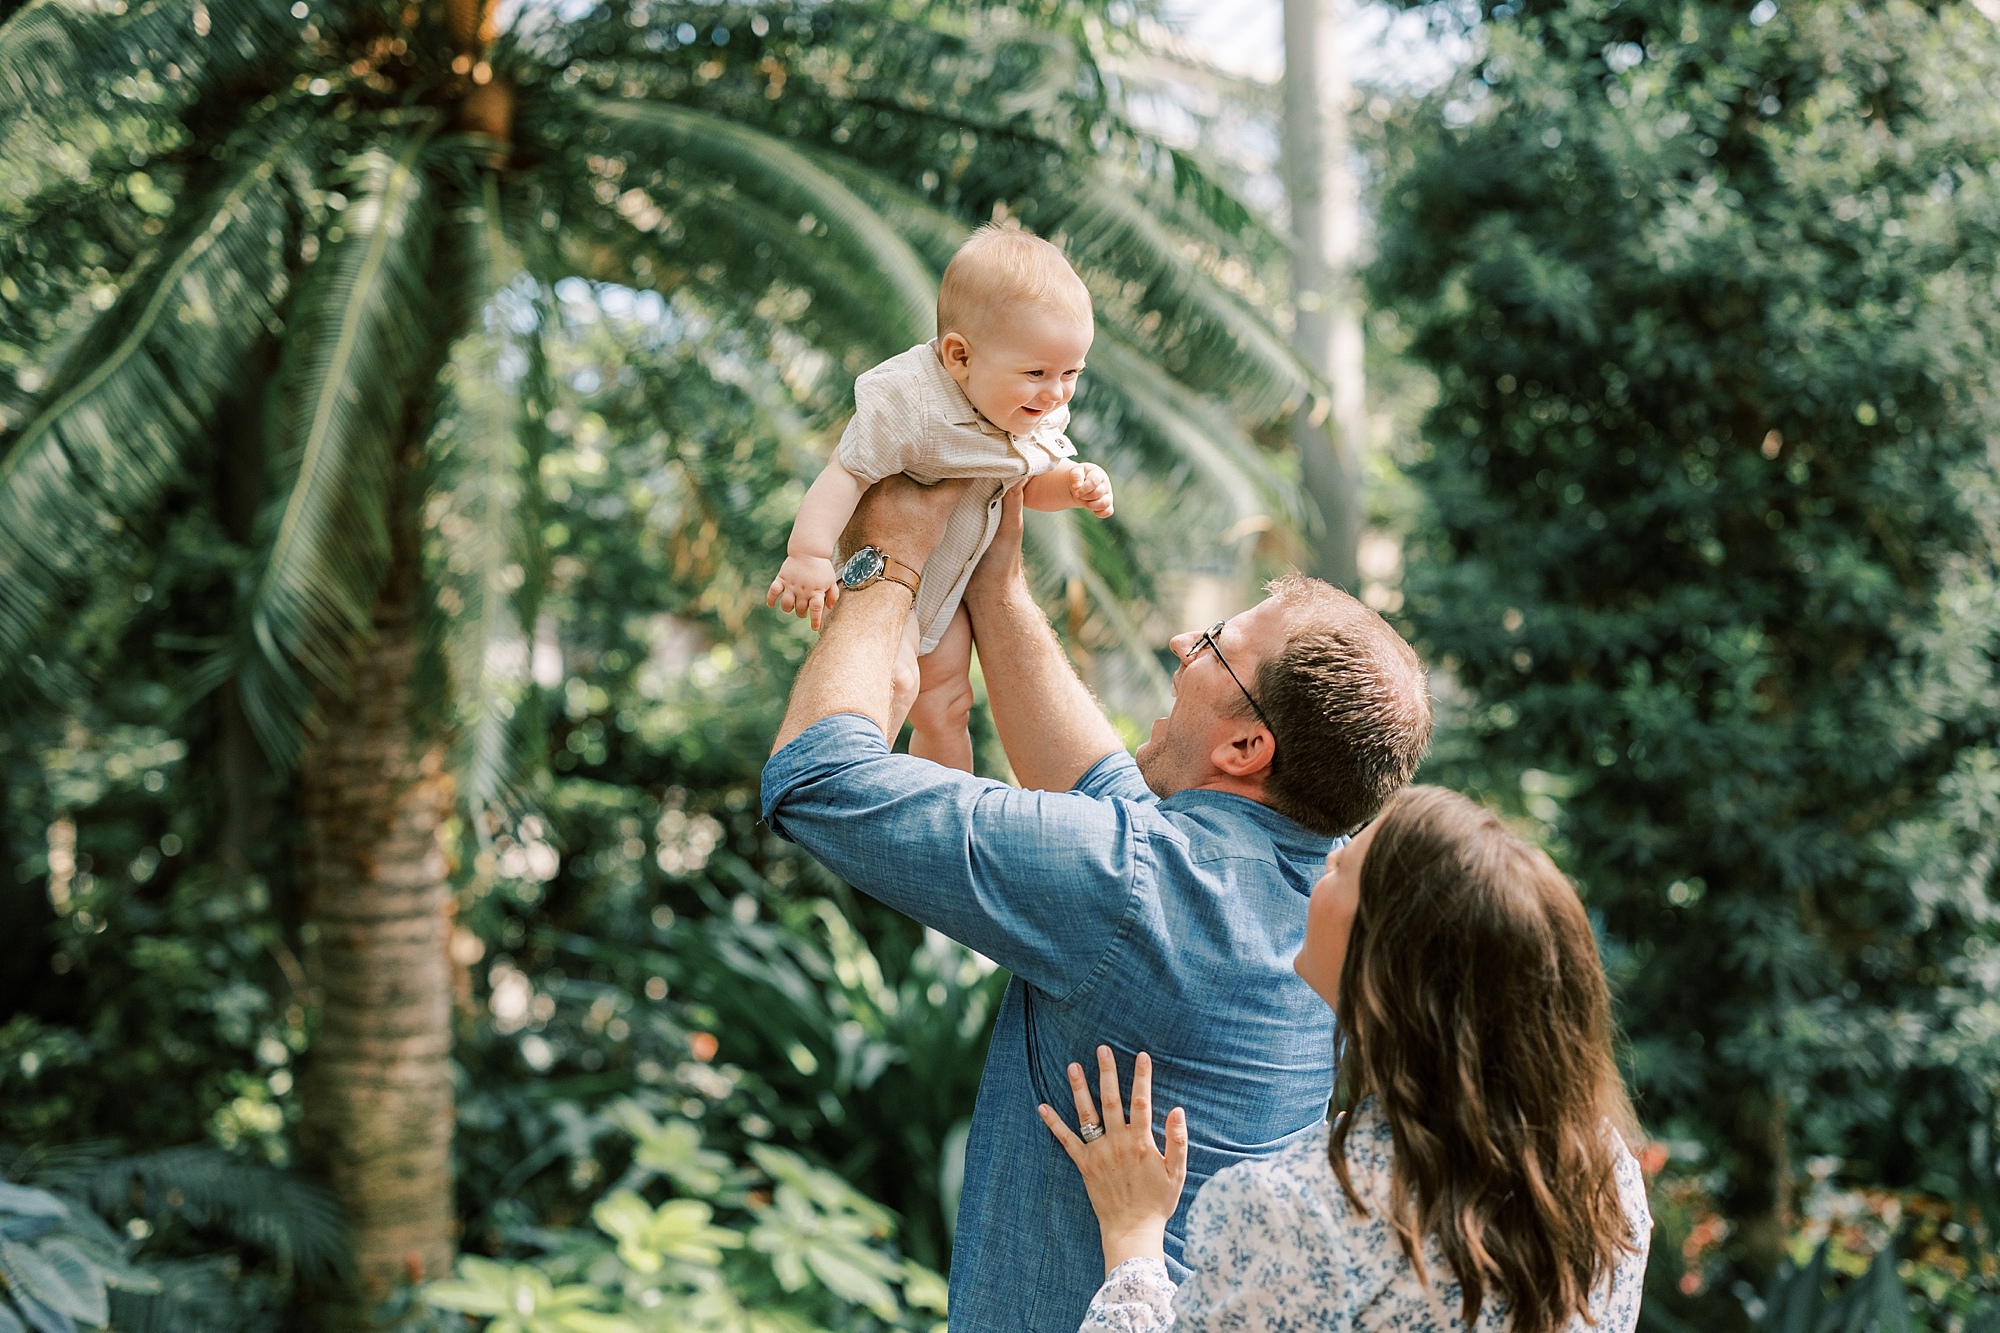 dad lifts up son in the air making him laugh during PA family photos 